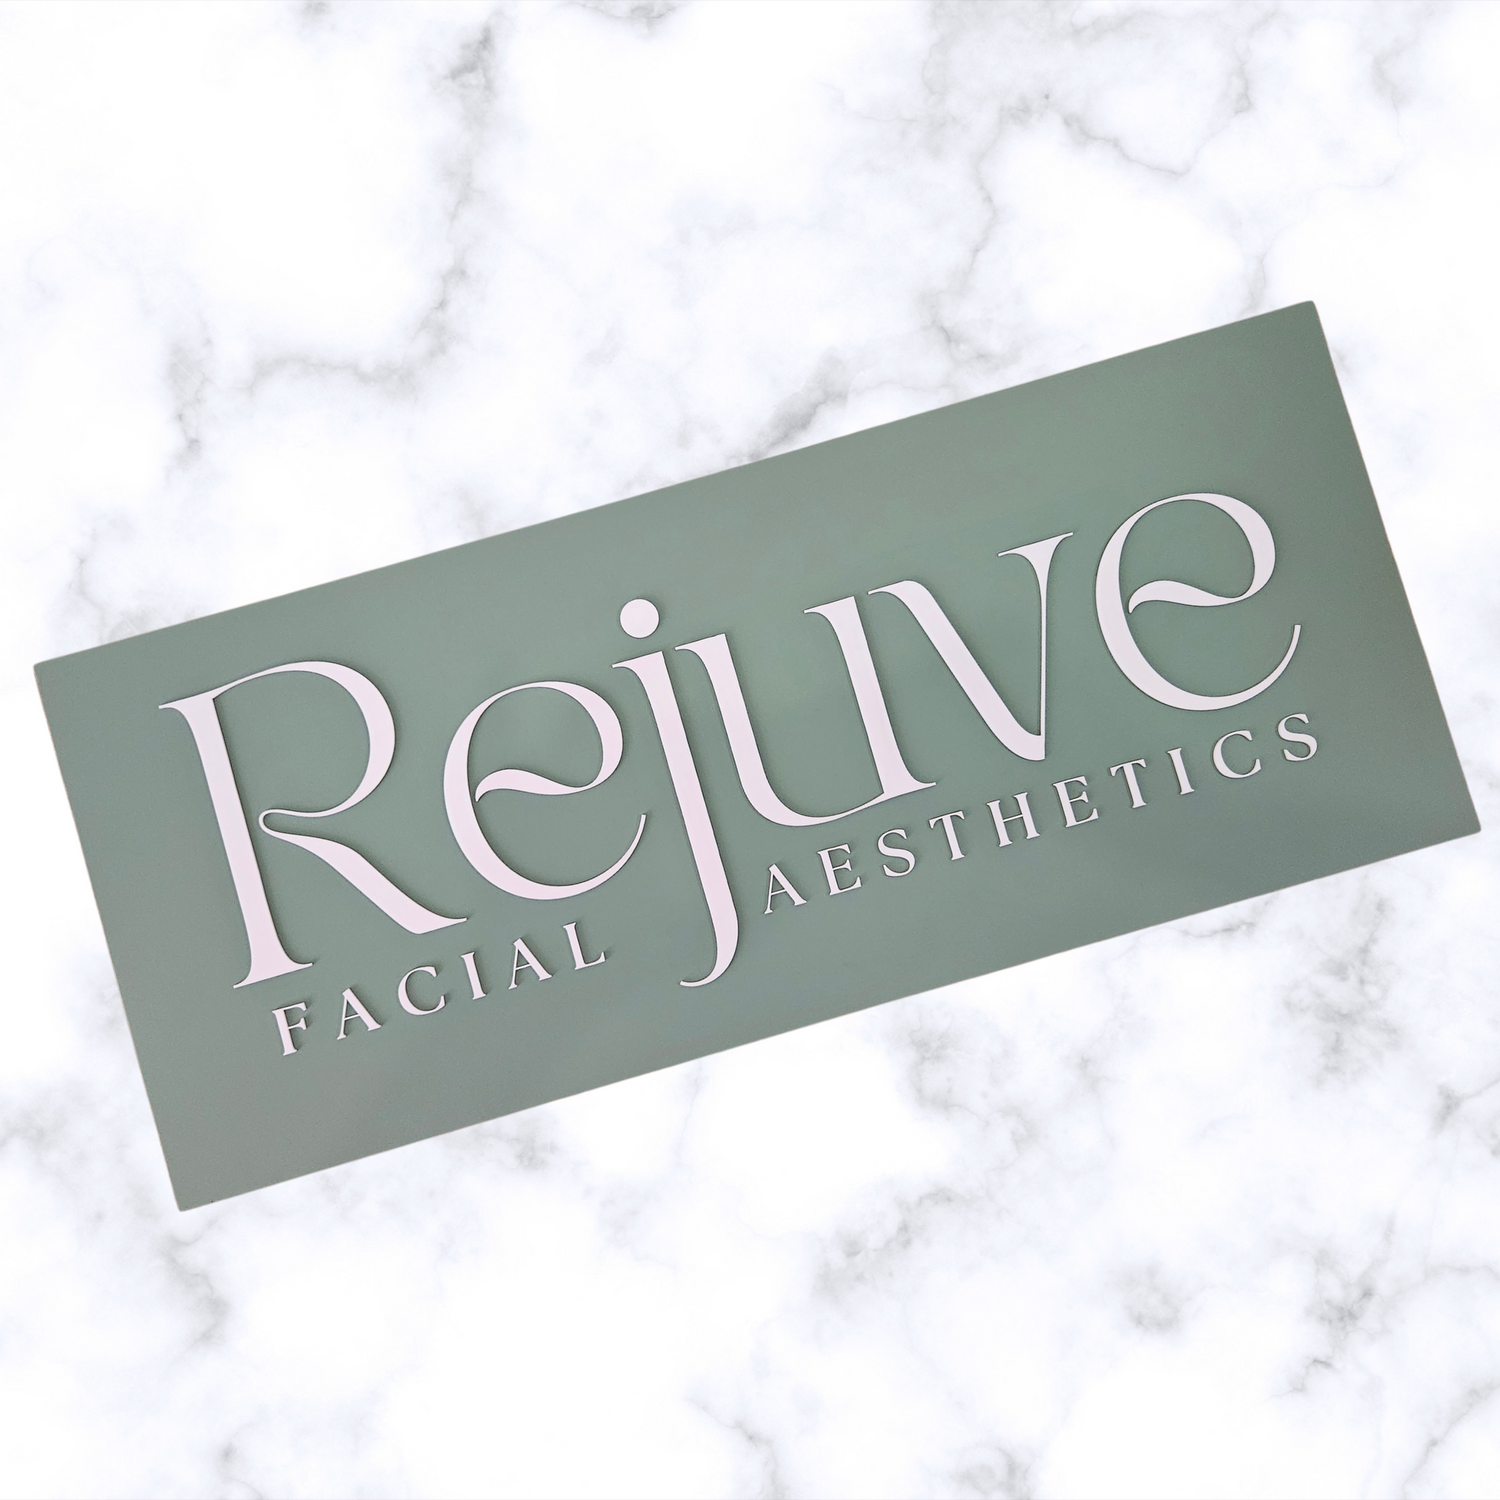 Rectangle Acrylic 3D Logo Business Sign in sage green and white letters - Rejuve Facial Aesthetics